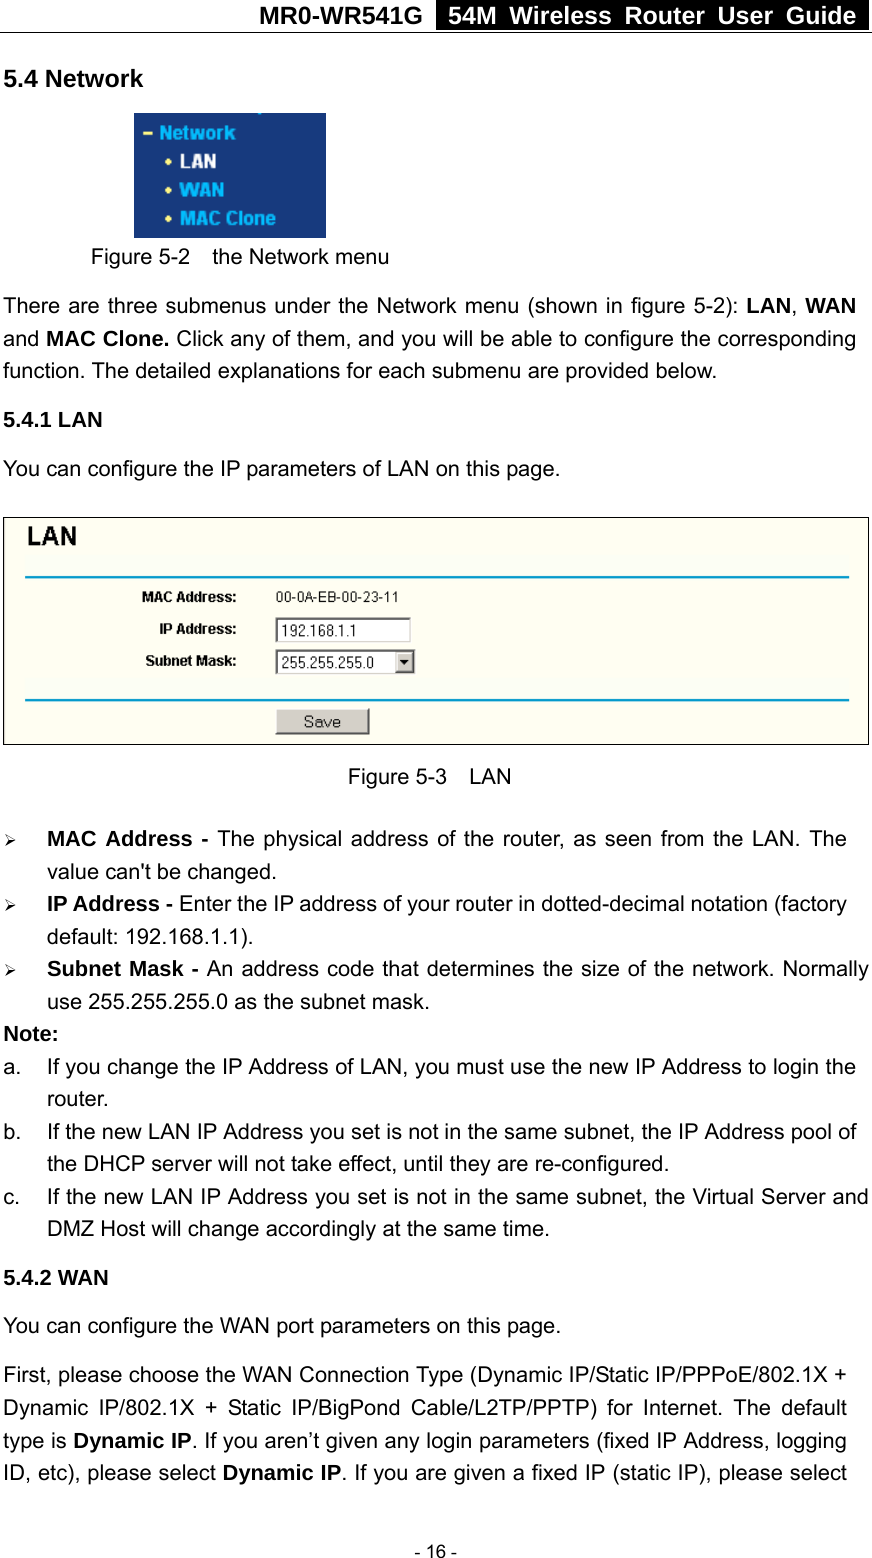 MR0-WR541G   54M Wireless Router User Guide  5.4 Network      Figure 5-2    the Network menu There are three submenus under the Network menu (shown in figure 5-2): LAN, WAN and MAC Clone. Click any of them, and you will be able to configure the corresponding function. The detailed explanations for each submenu are provided below. 5.4.1 LAN You can configure the IP parameters of LAN on this page.    Figure 5-3  LAN ¾ MAC Address - The physical address of the router, as seen from the LAN. The value can&apos;t be changed. ¾ IP Address - Enter the IP address of your router in dotted-decimal notation (factory default: 192.168.1.1). ¾ Subnet Mask - An address code that determines the size of the network. Normally use 255.255.255.0 as the subnet mask.   Note:  a.  If you change the IP Address of LAN, you must use the new IP Address to login the router.  b.  If the new LAN IP Address you set is not in the same subnet, the IP Address pool of the DHCP server will not take effect, until they are re-configured. c.  If the new LAN IP Address you set is not in the same subnet, the Virtual Server and DMZ Host will change accordingly at the same time. 5.4.2 WAN You can configure the WAN port parameters on this page. First, please choose the WAN Connection Type (Dynamic IP/Static IP/PPPoE/802.1X + Dynamic IP/802.1X + Static IP/BigPond Cable/L2TP/PPTP) for Internet. The default type is Dynamic IP. If you aren’t given any login parameters (fixed IP Address, logging ID, etc), please select Dynamic IP. If you are given a fixed IP (static IP), please select  - 16 - 